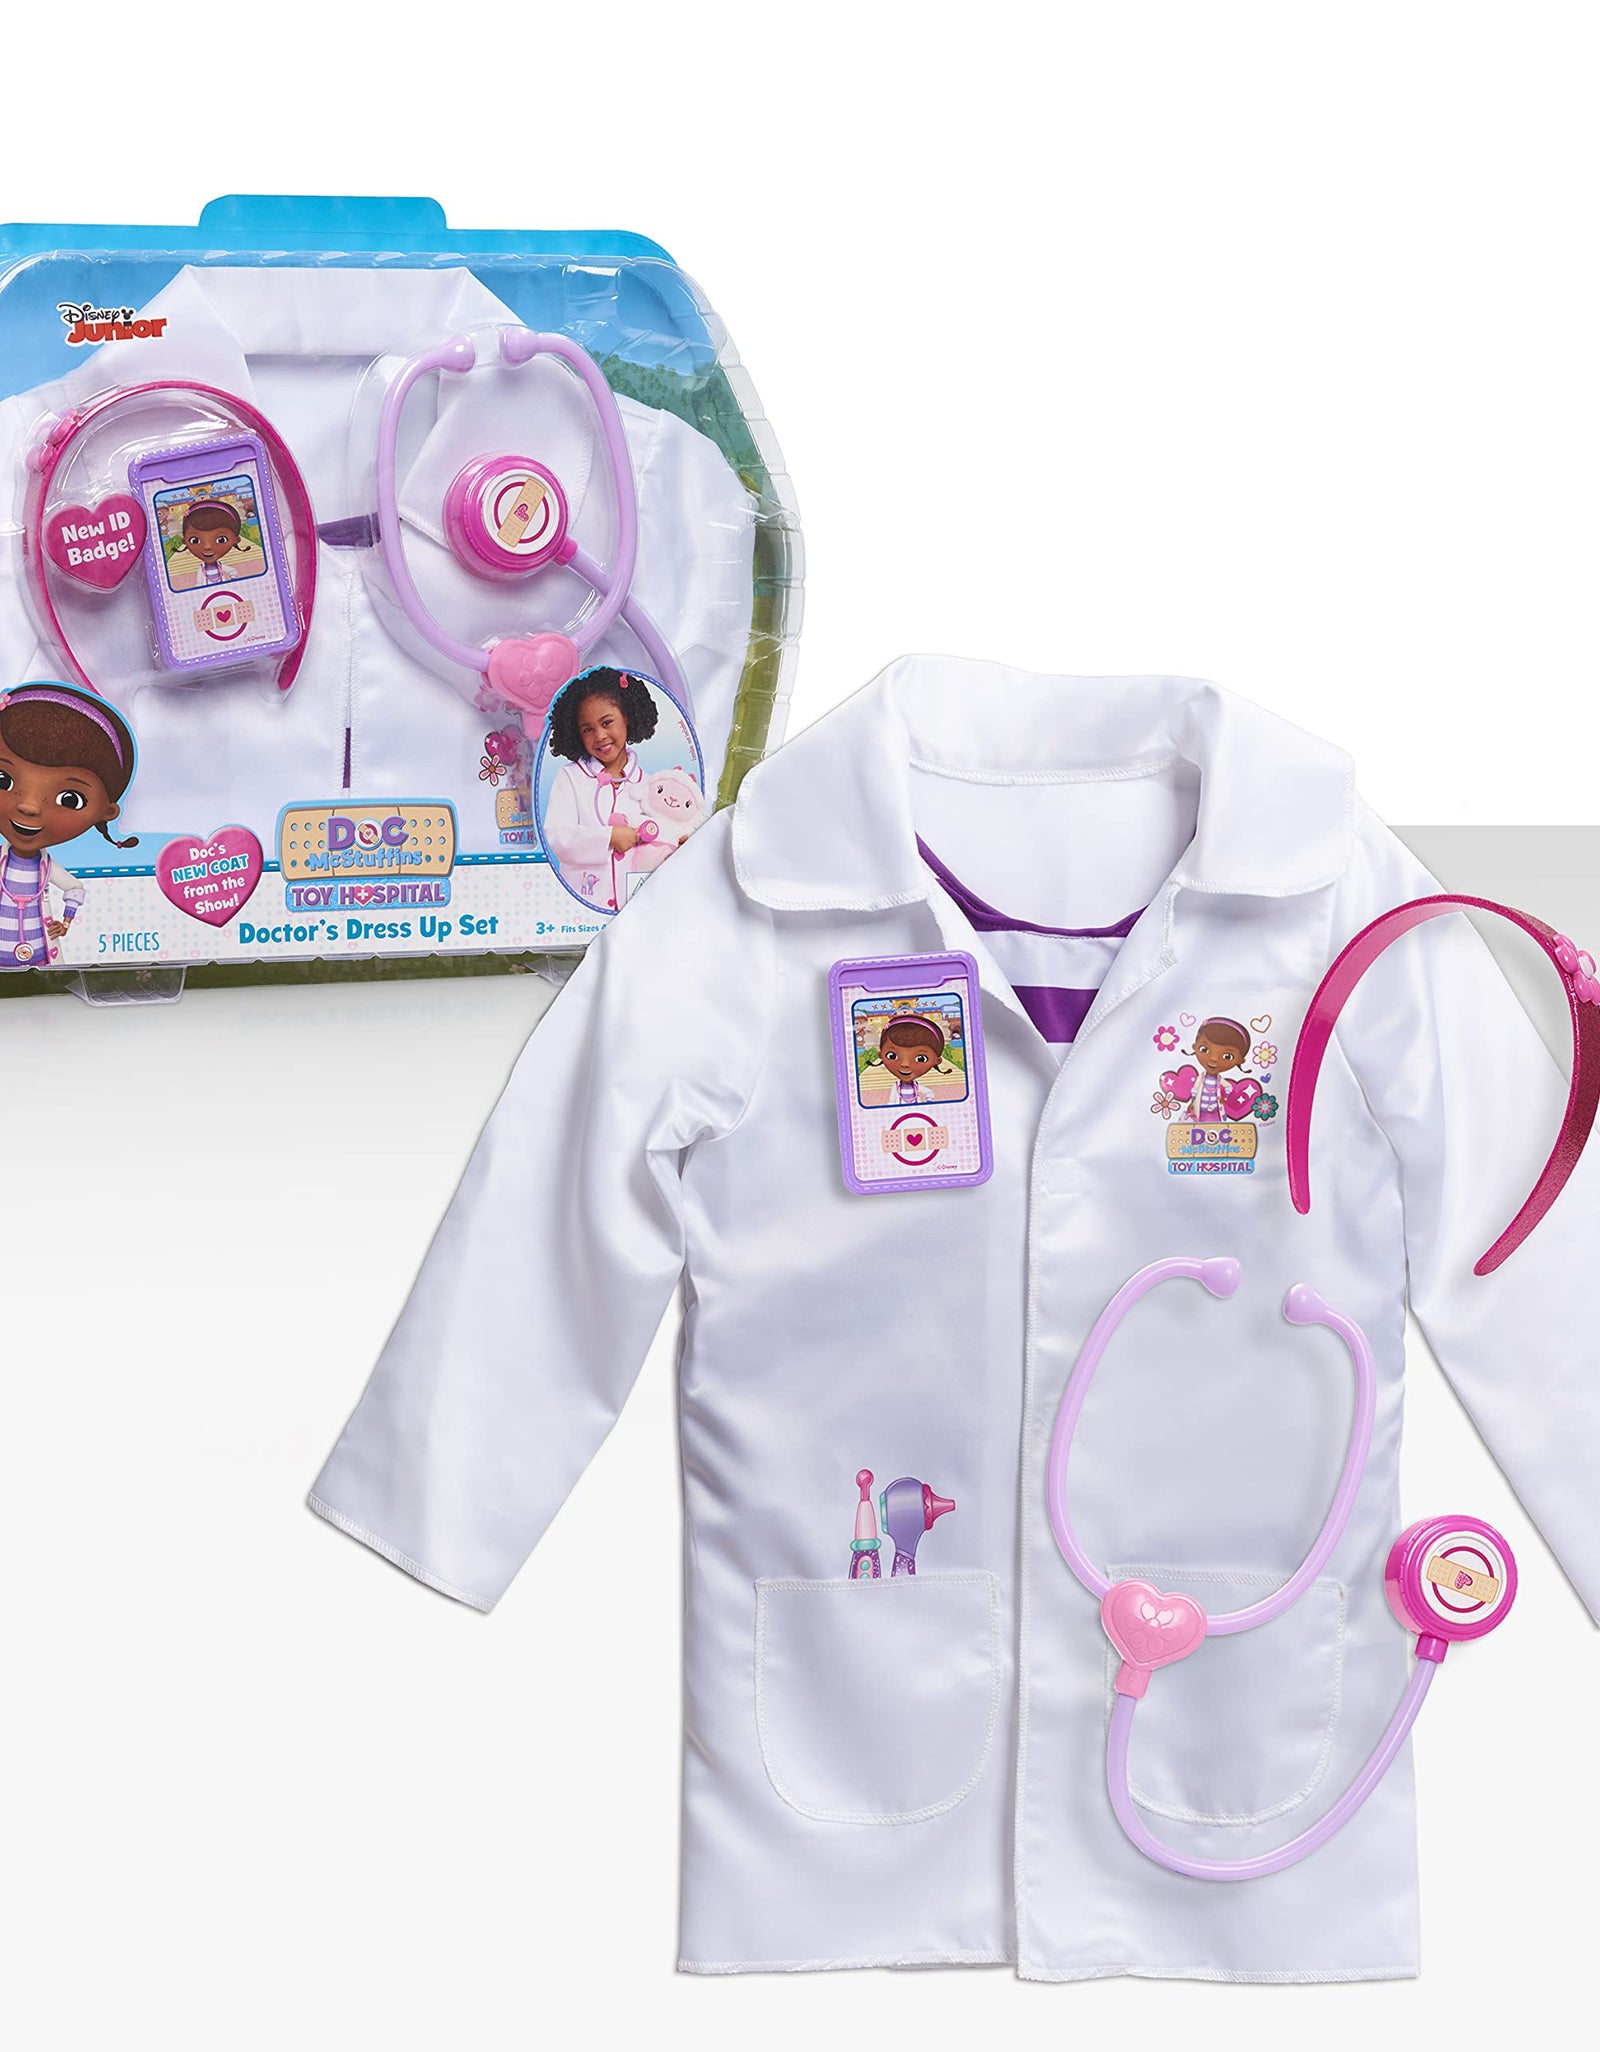 Doc McStuffins Doctor's Dress Up Set, by Just Play